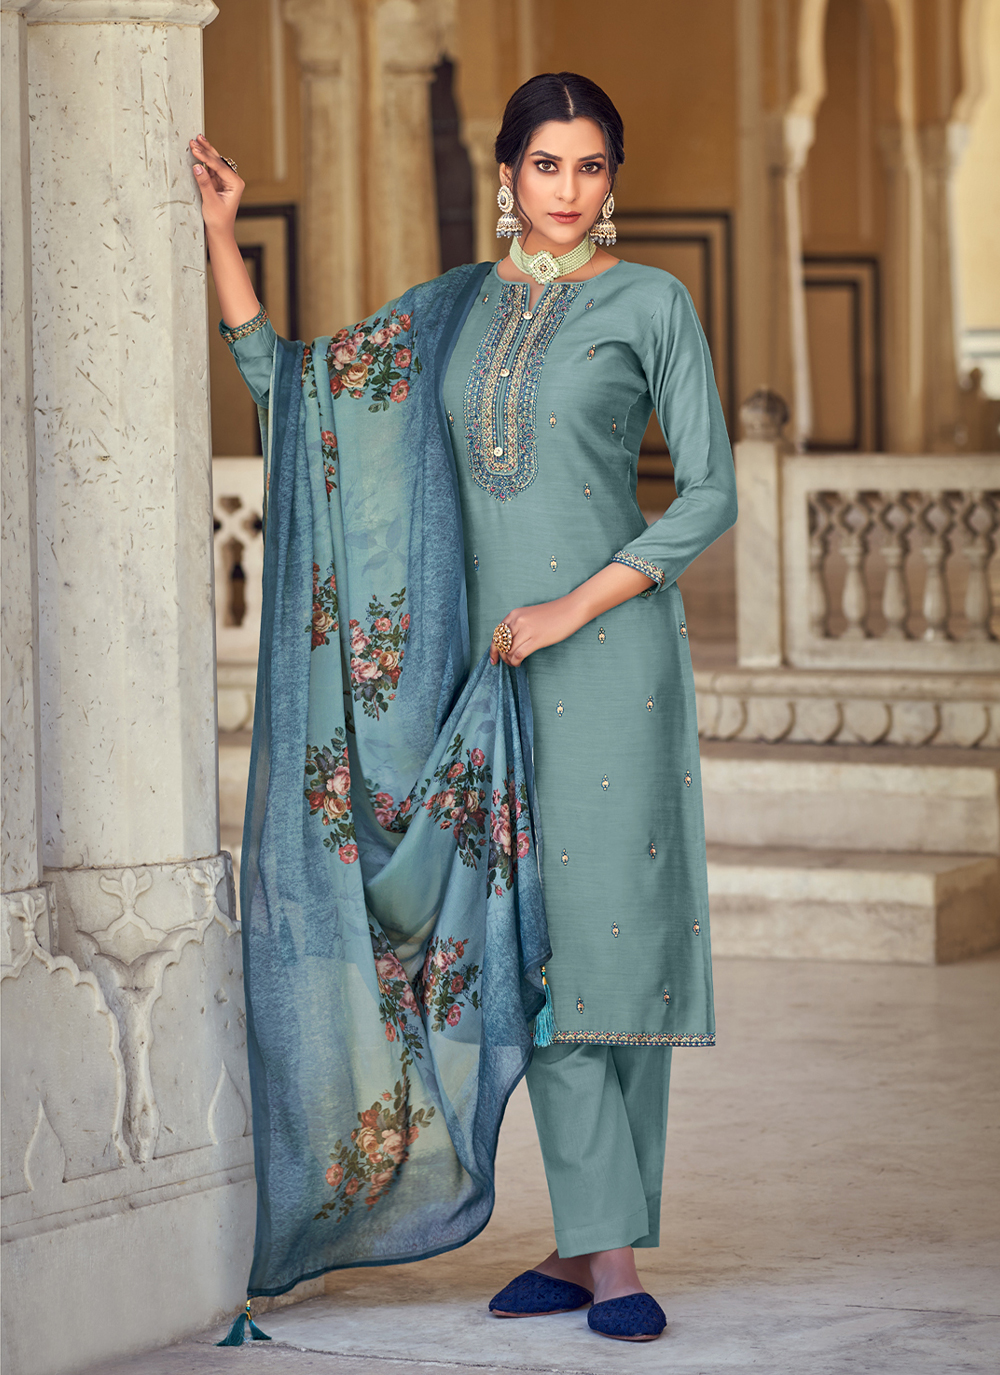 Latest 50 Net Salwar Suit Designs For Women (2022) - Tips and Beauty |  Kurti designs party wear, Suit designs, Dress indian style